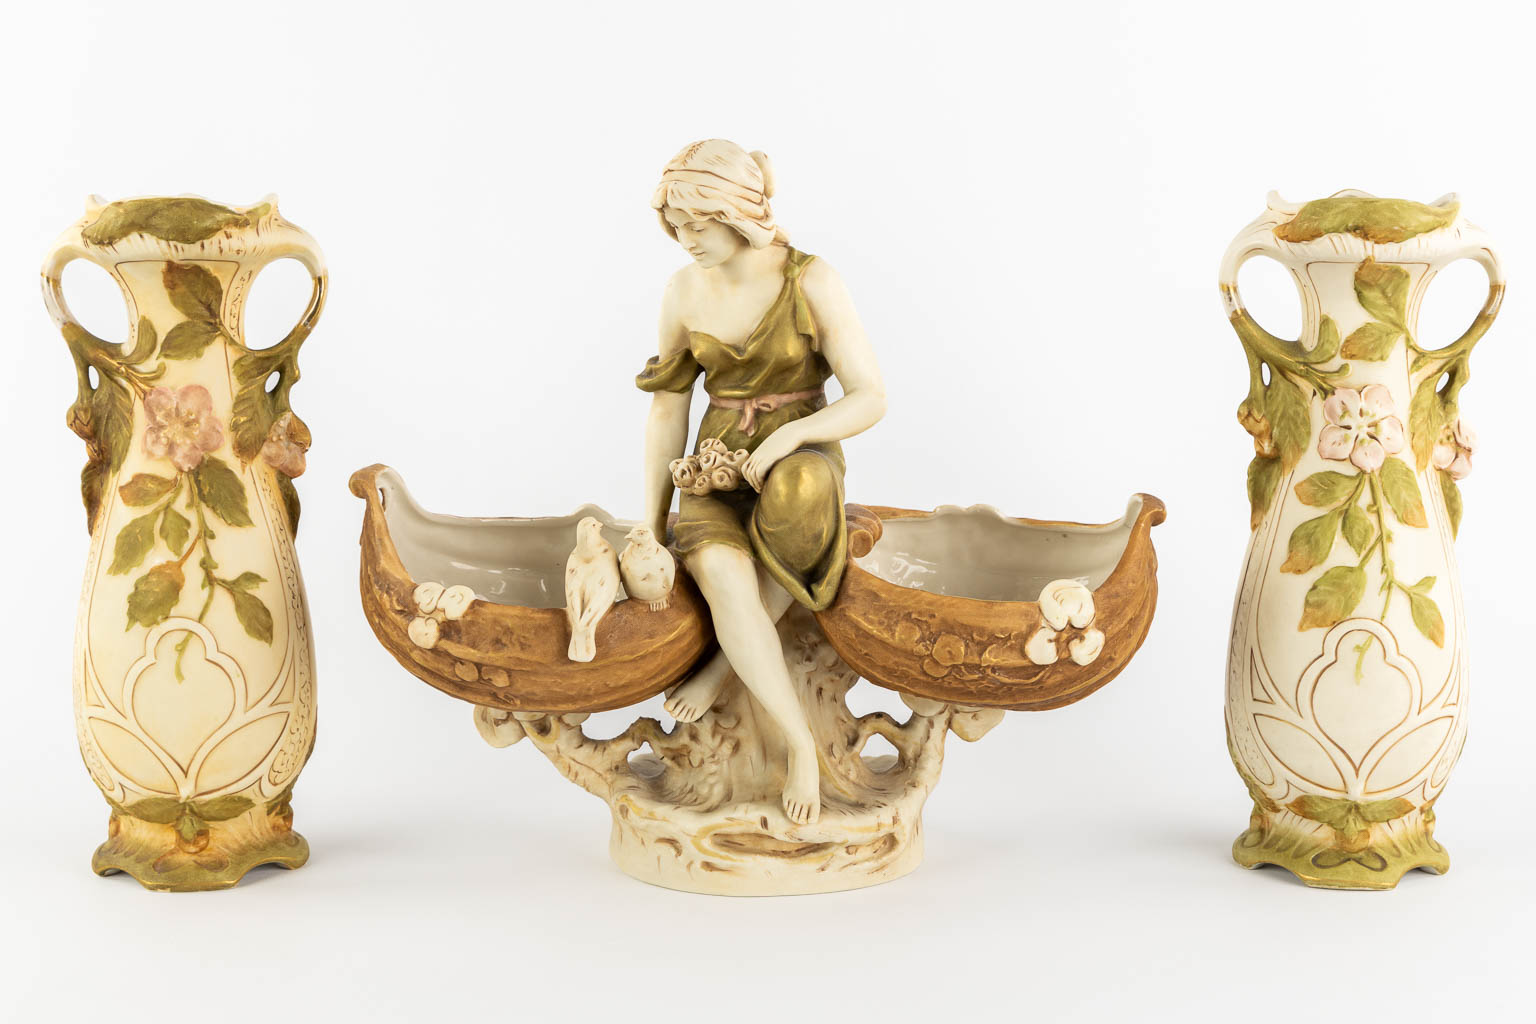 Royal Dux, a pair of vases and a lady with two baskets. Polychrome porcelain. (L:17 x W:36 x H:32 cm)